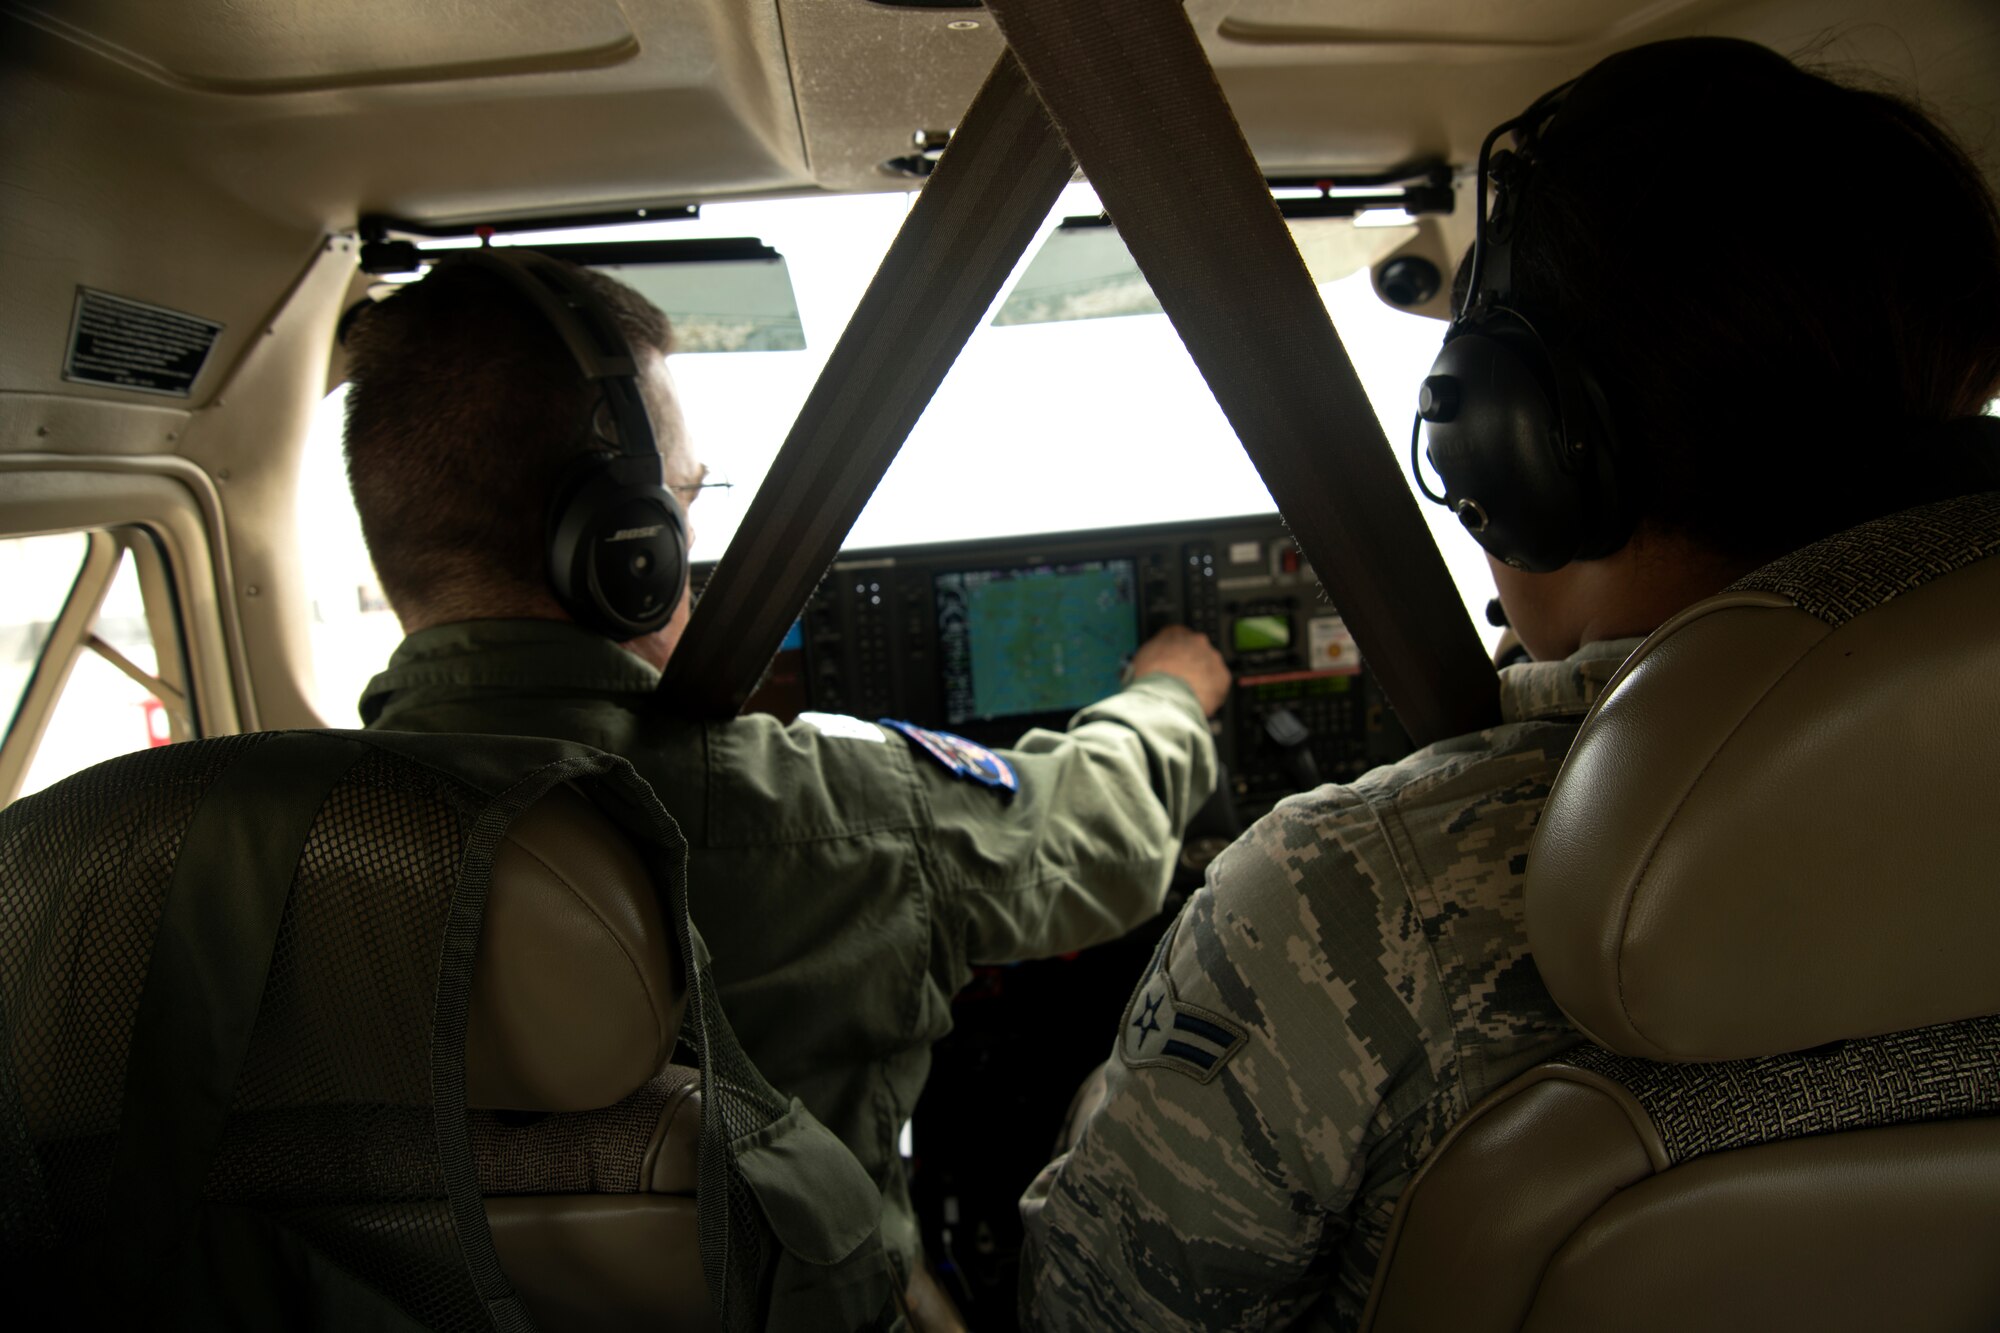 Civil Air Patrol (CAP) Lt. Col. Brett Grooms, pilot, left, performs preflight checks before taxiing his aircraft while Airman 1st Class Gianna Suber-Green, 20th Operations Support Squadron airfield management specialist, observes at Shaw Air Force Base, South Carolina, July 12, 2019.